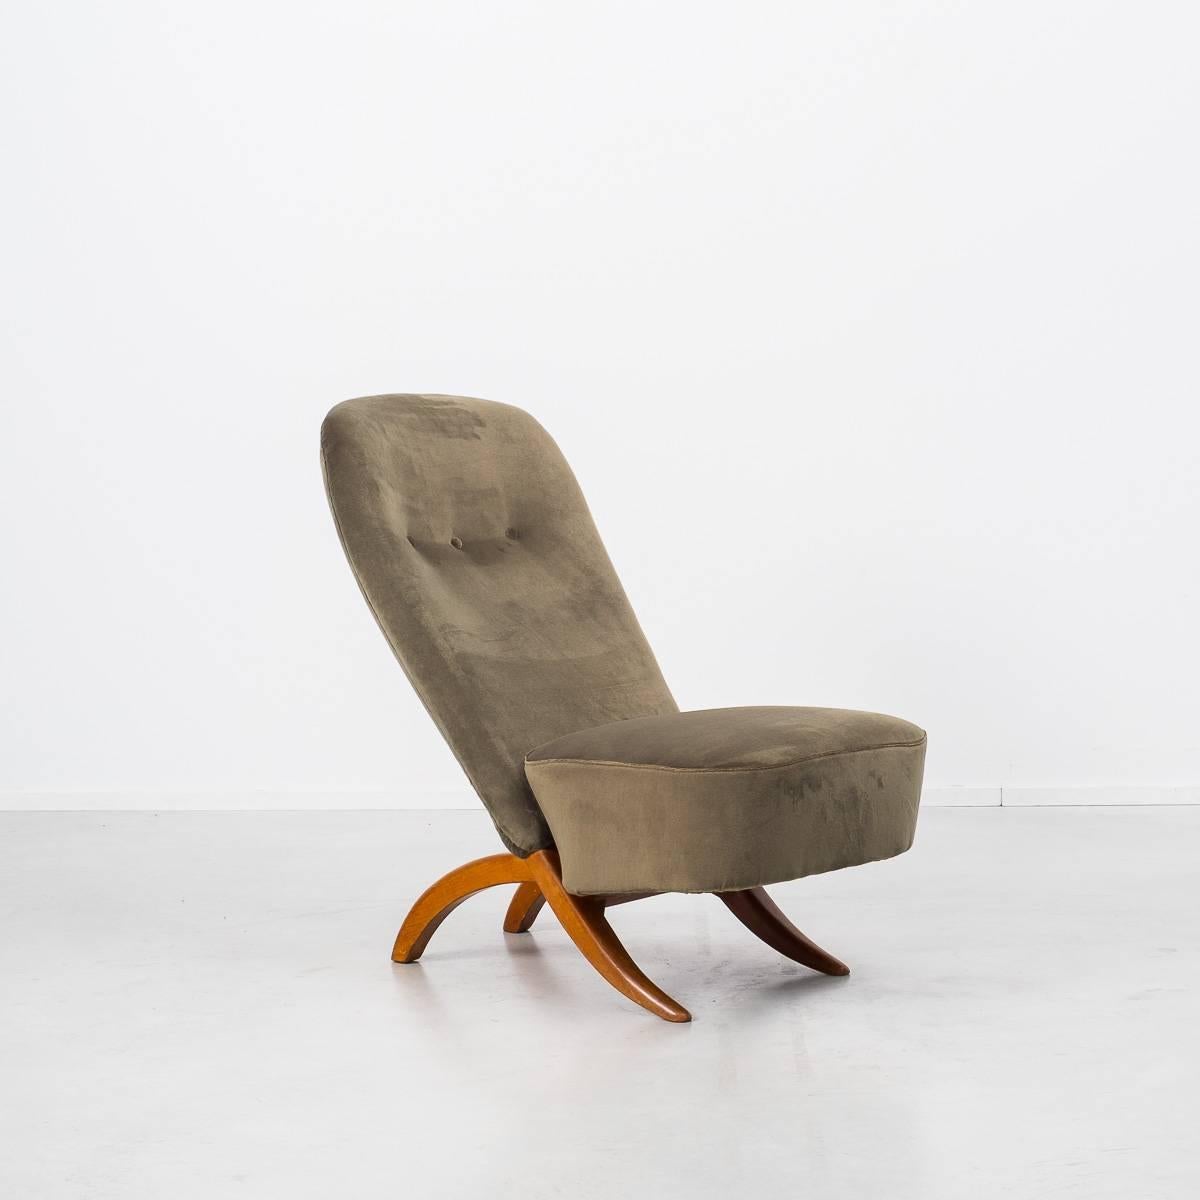 This eye-catching chair designed by Theo Ruth for Artifort cuts a really pleasing profile. Ruth joined Artifort in 1936 as a skilled furniture maker working across their entire range. In a short period of time after joining them he was promoted to